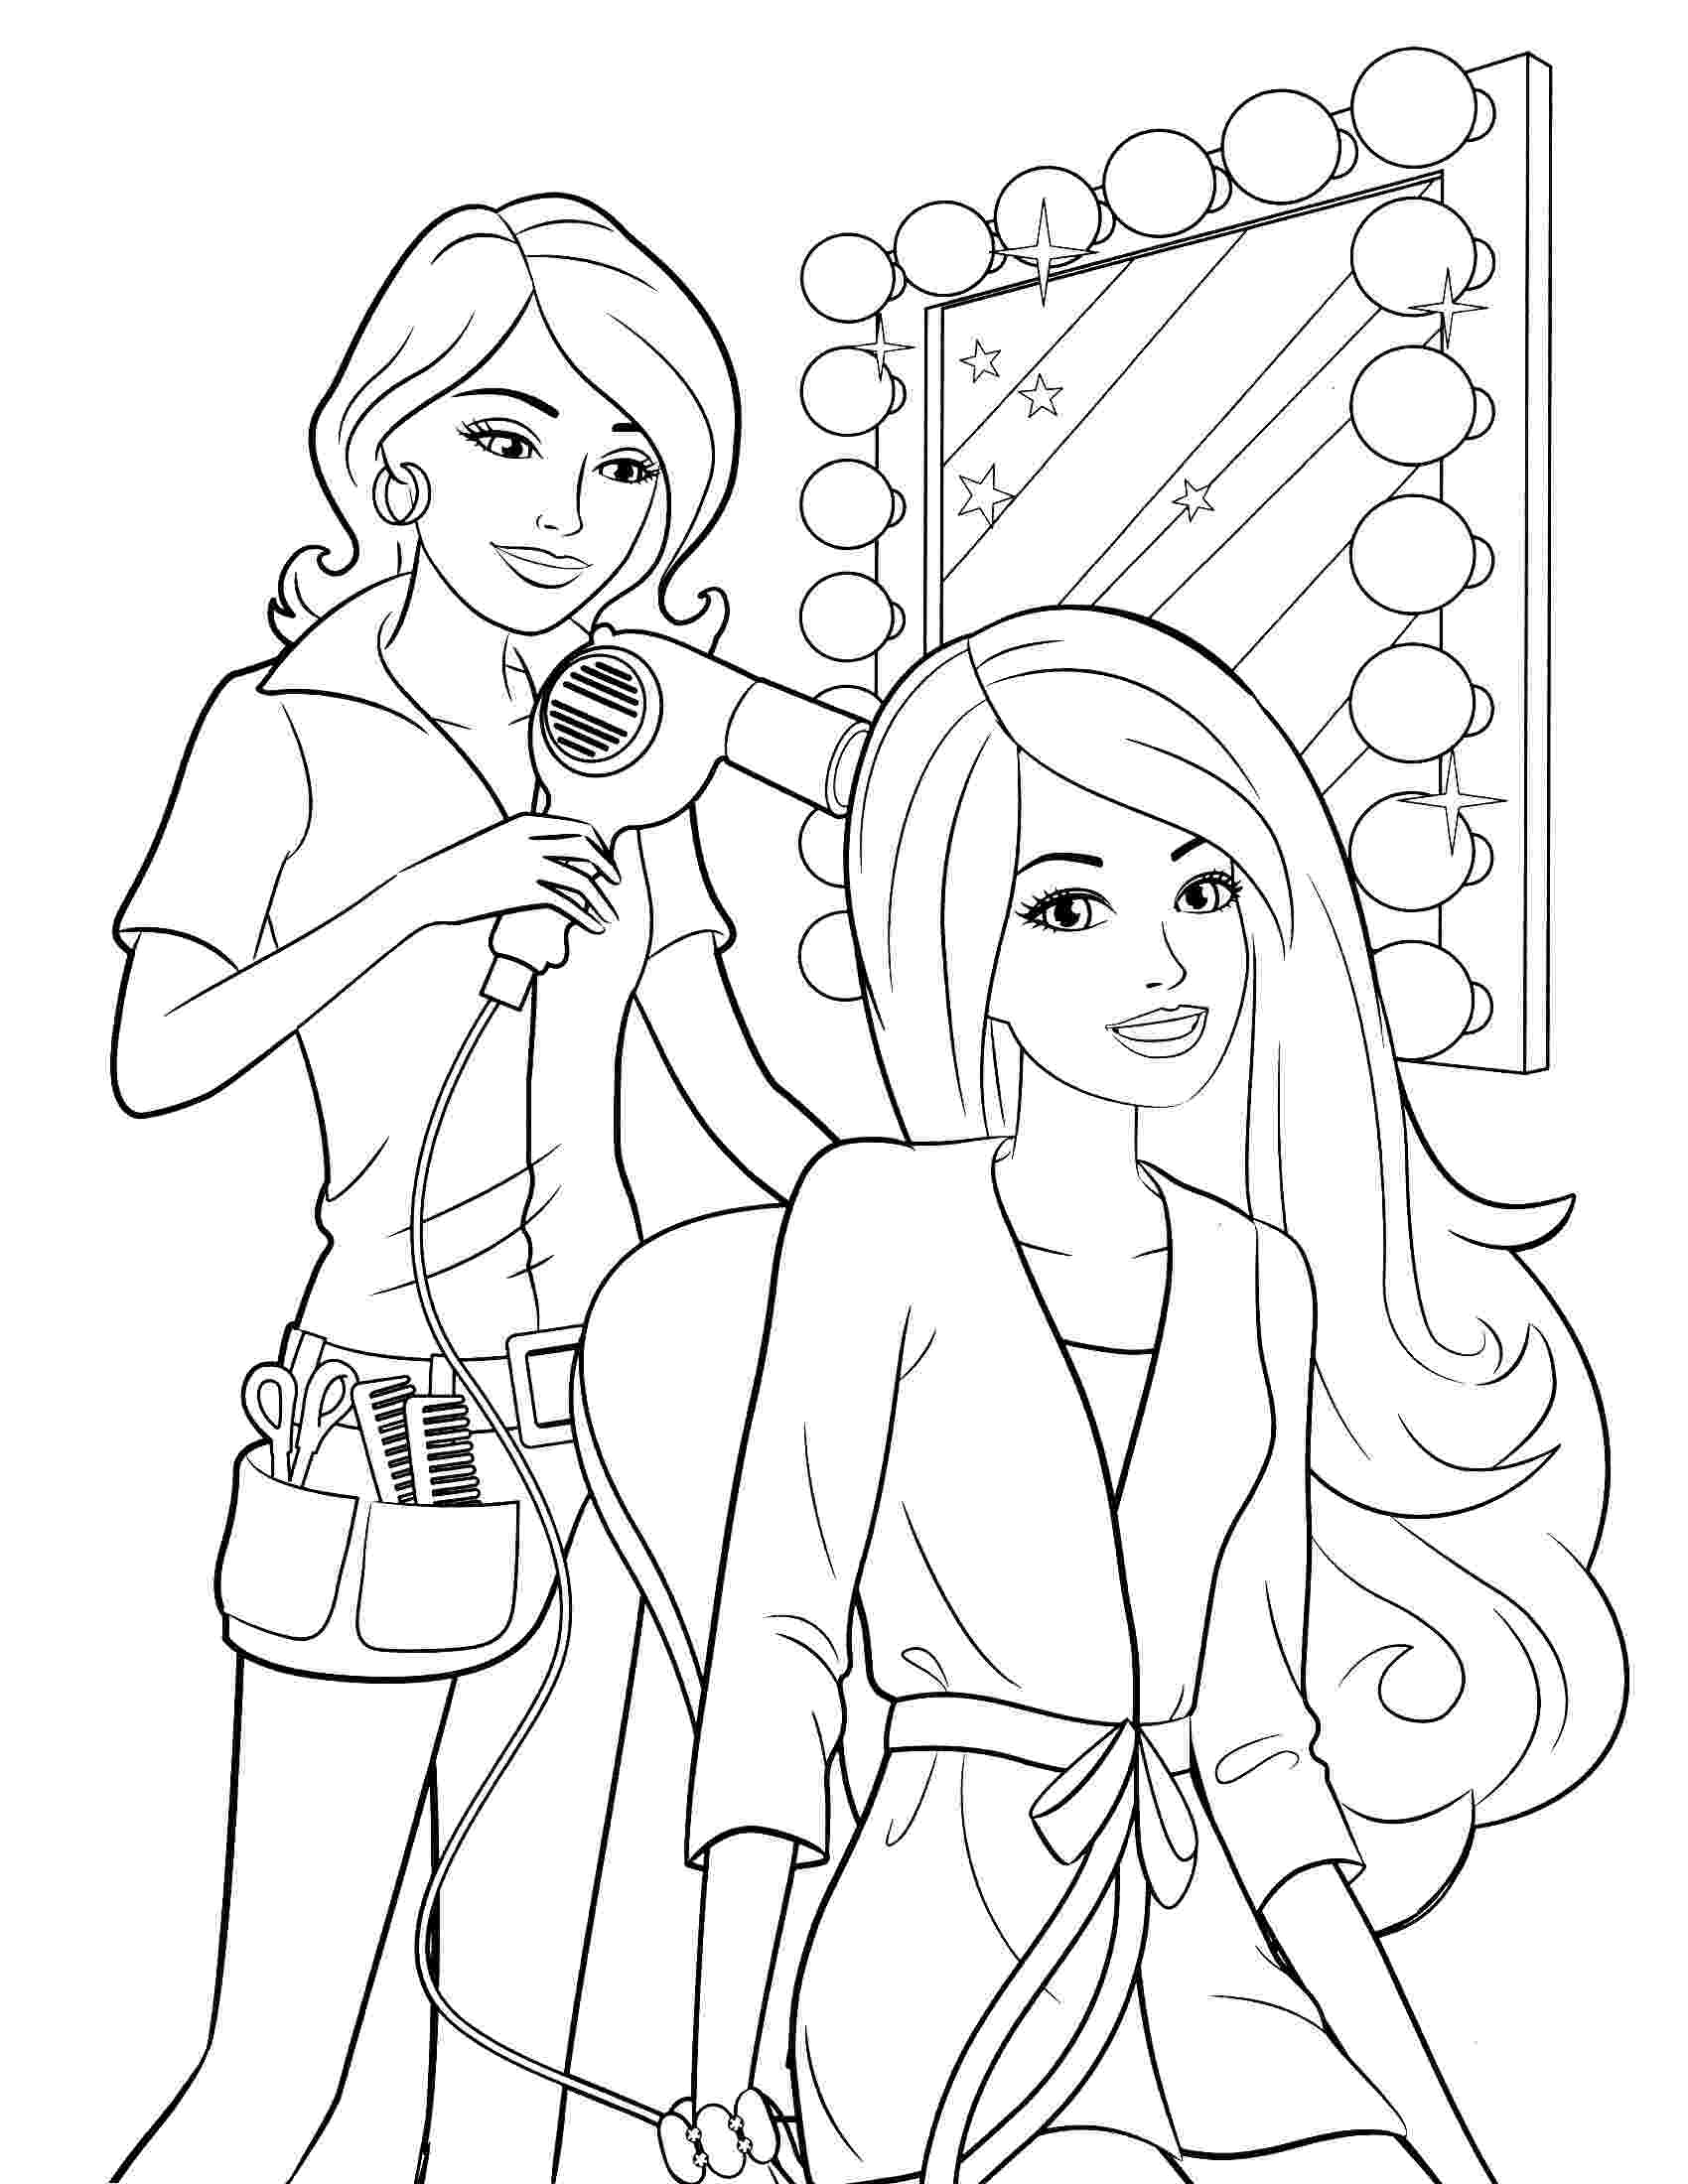 girl coloring books cute girl coloring pages to download and print for free girl coloring books 